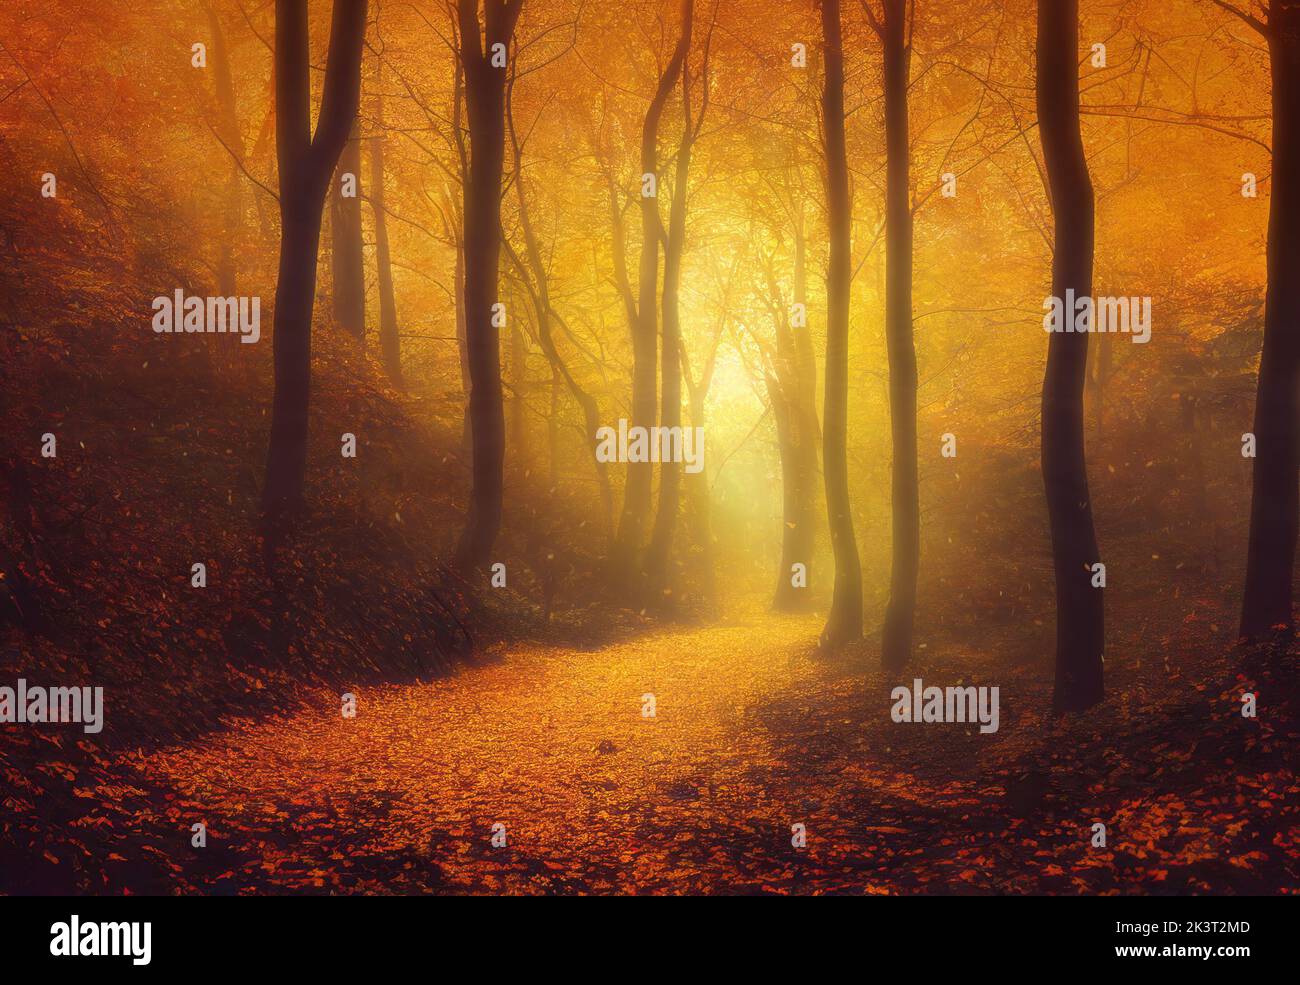 Foggy autumn forest at dusk, trail covered with fallen leaves. Digital 3D illustration Stock Photo